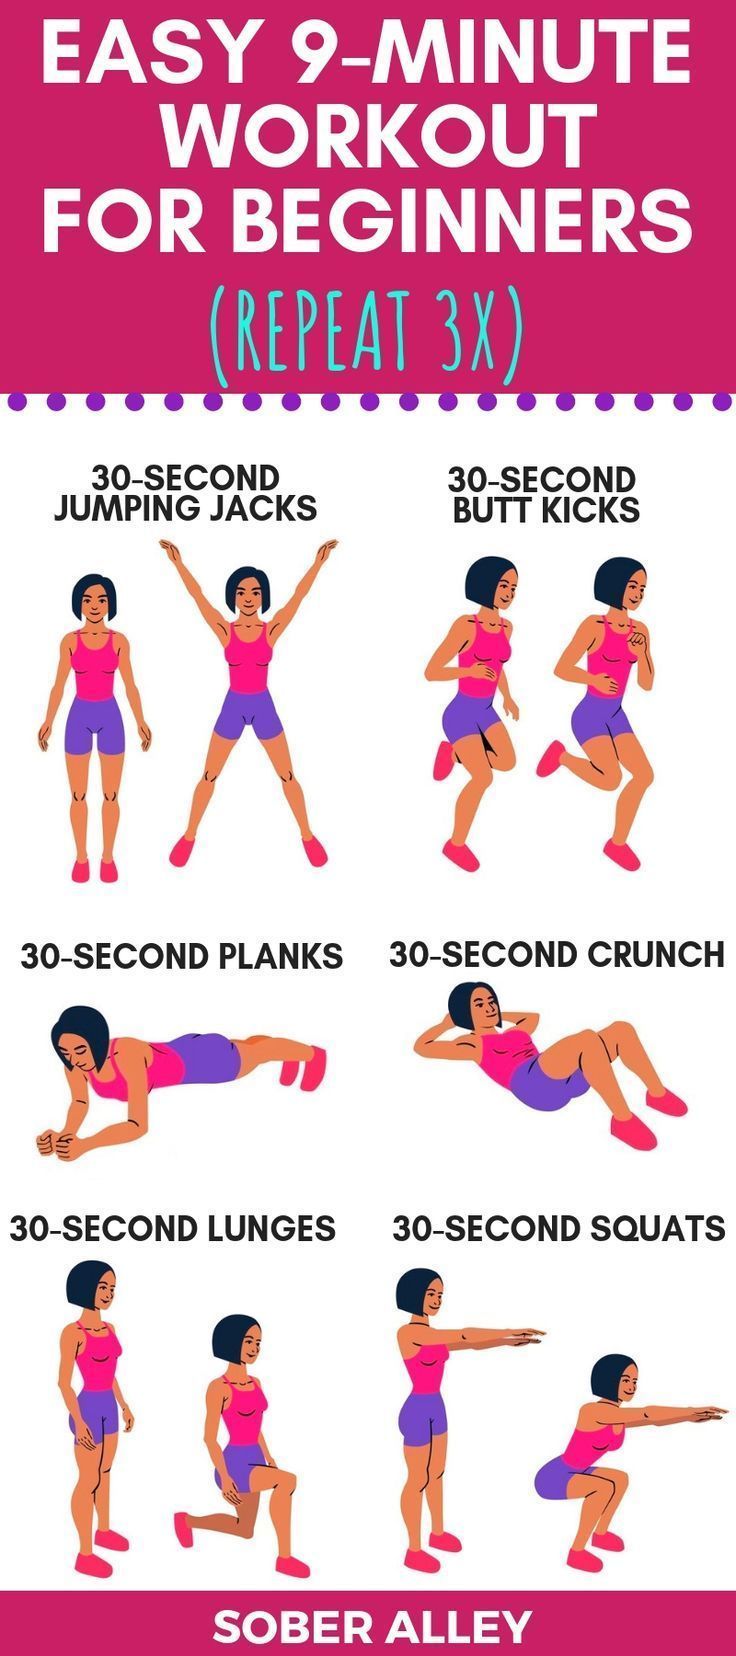 Super Simple 9-Minute Fat Burning Workout For Beginners -   14 fitness For Beginners at home ideas